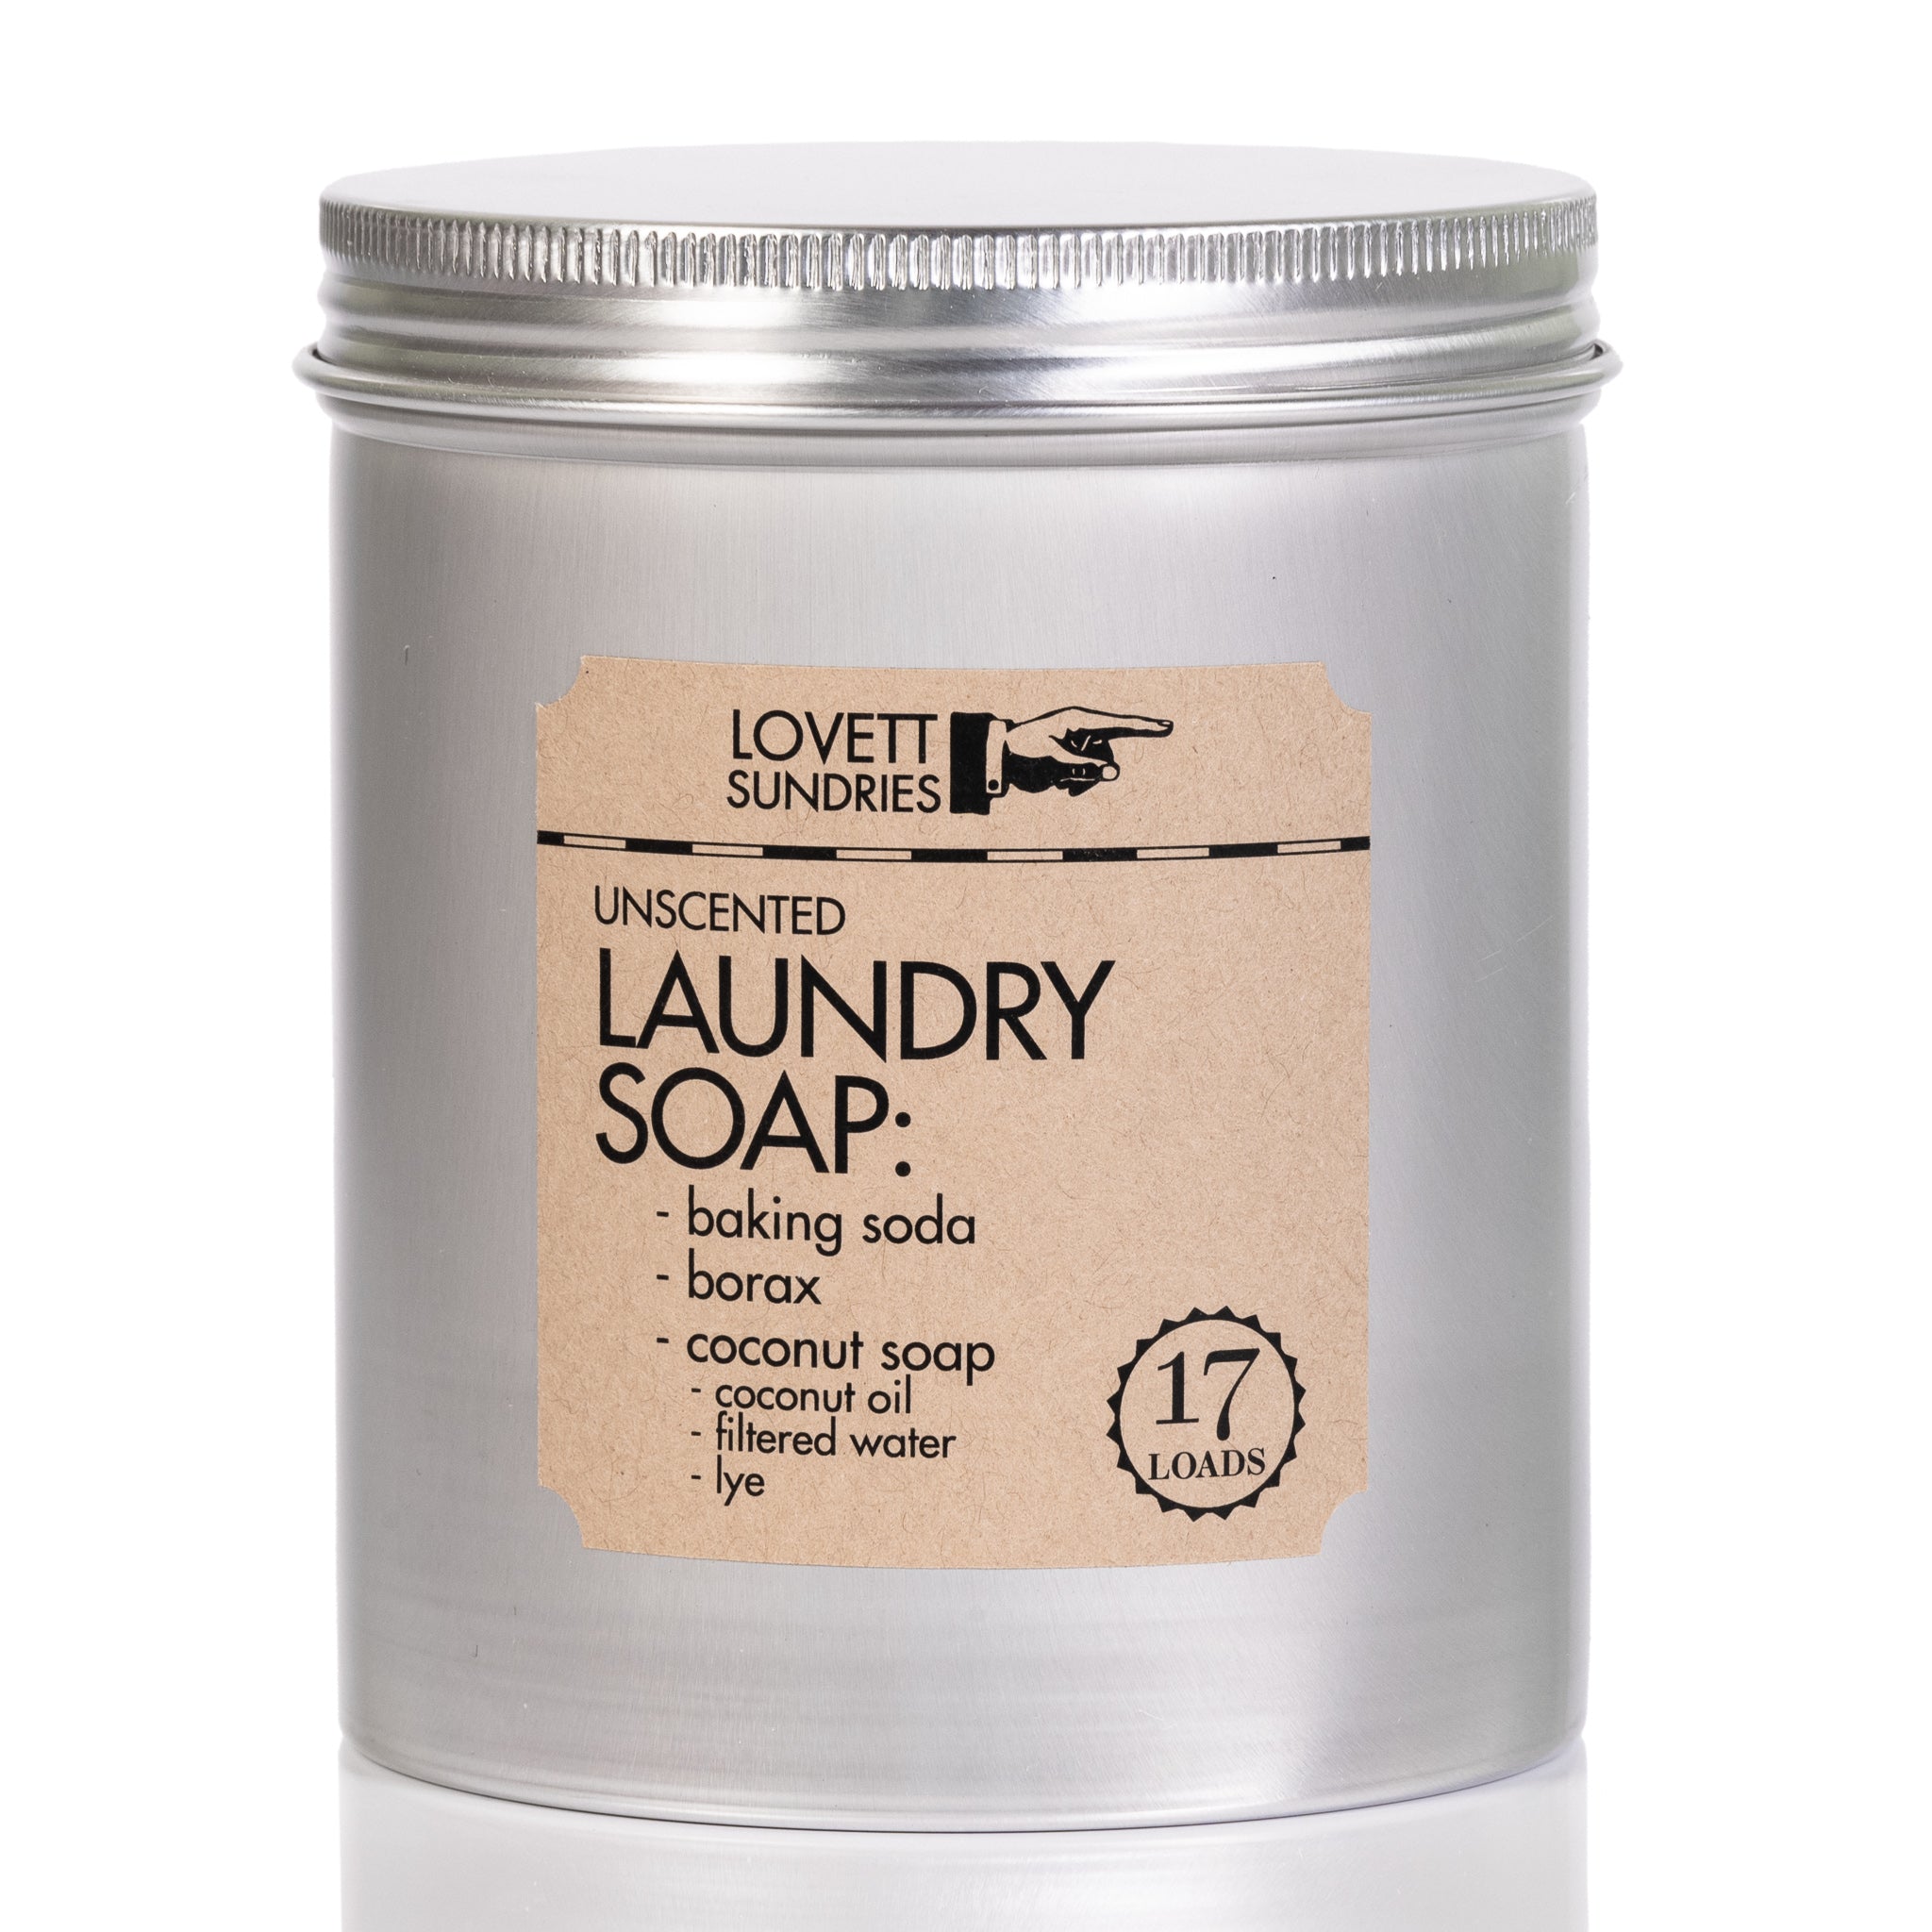 Unscented natural laundry soap in tin on white background.